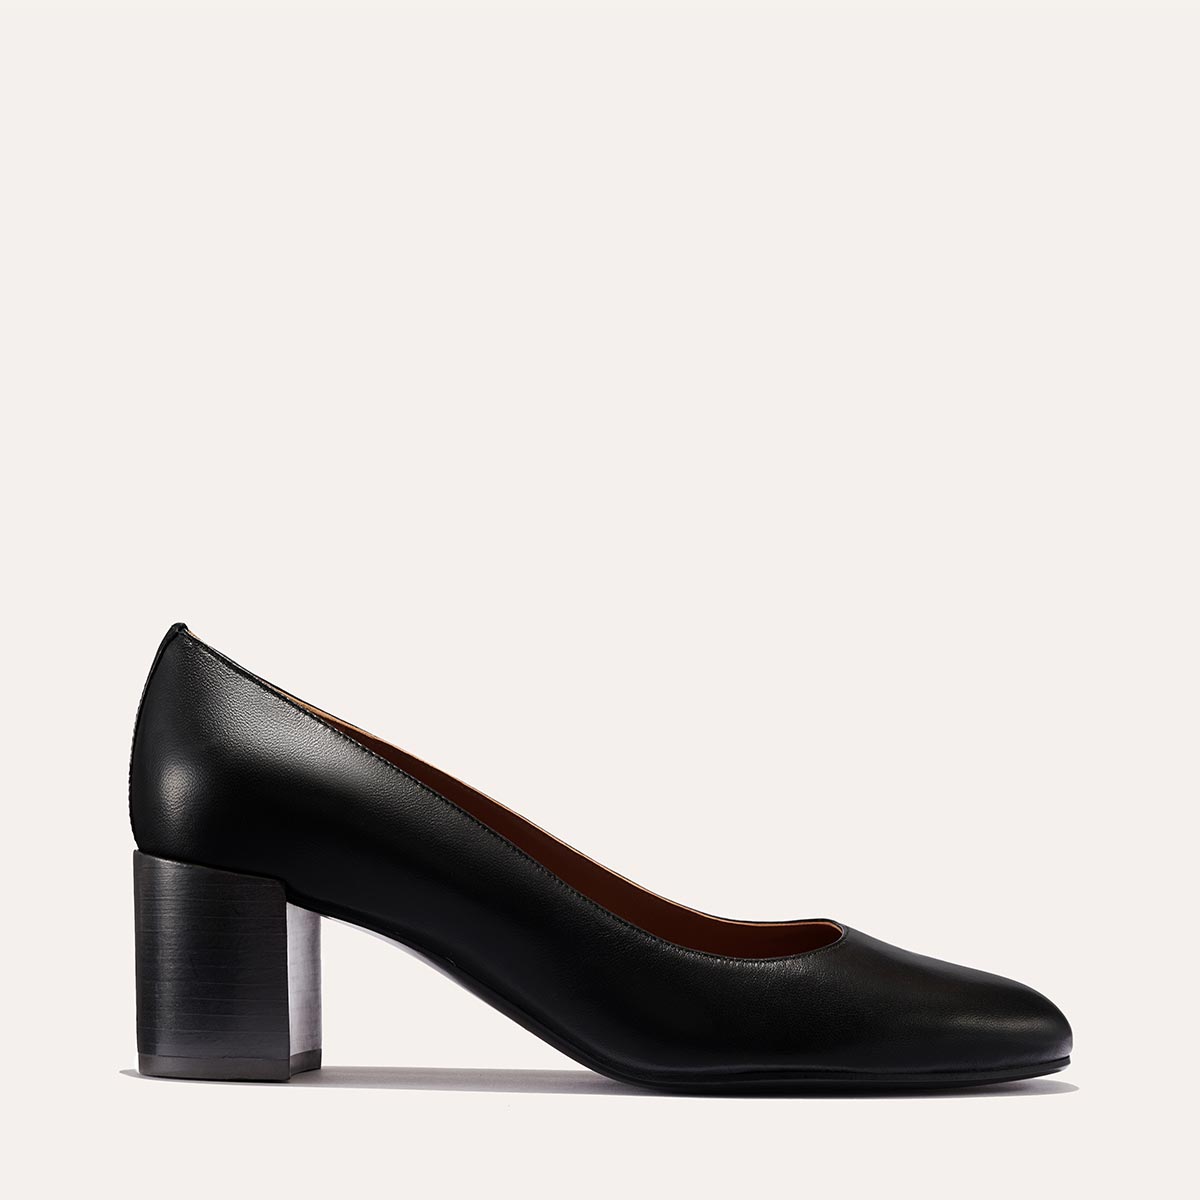 Margaux's classic and comfortable workwear Heel, made in Spain from soft, black Italian nappa leather